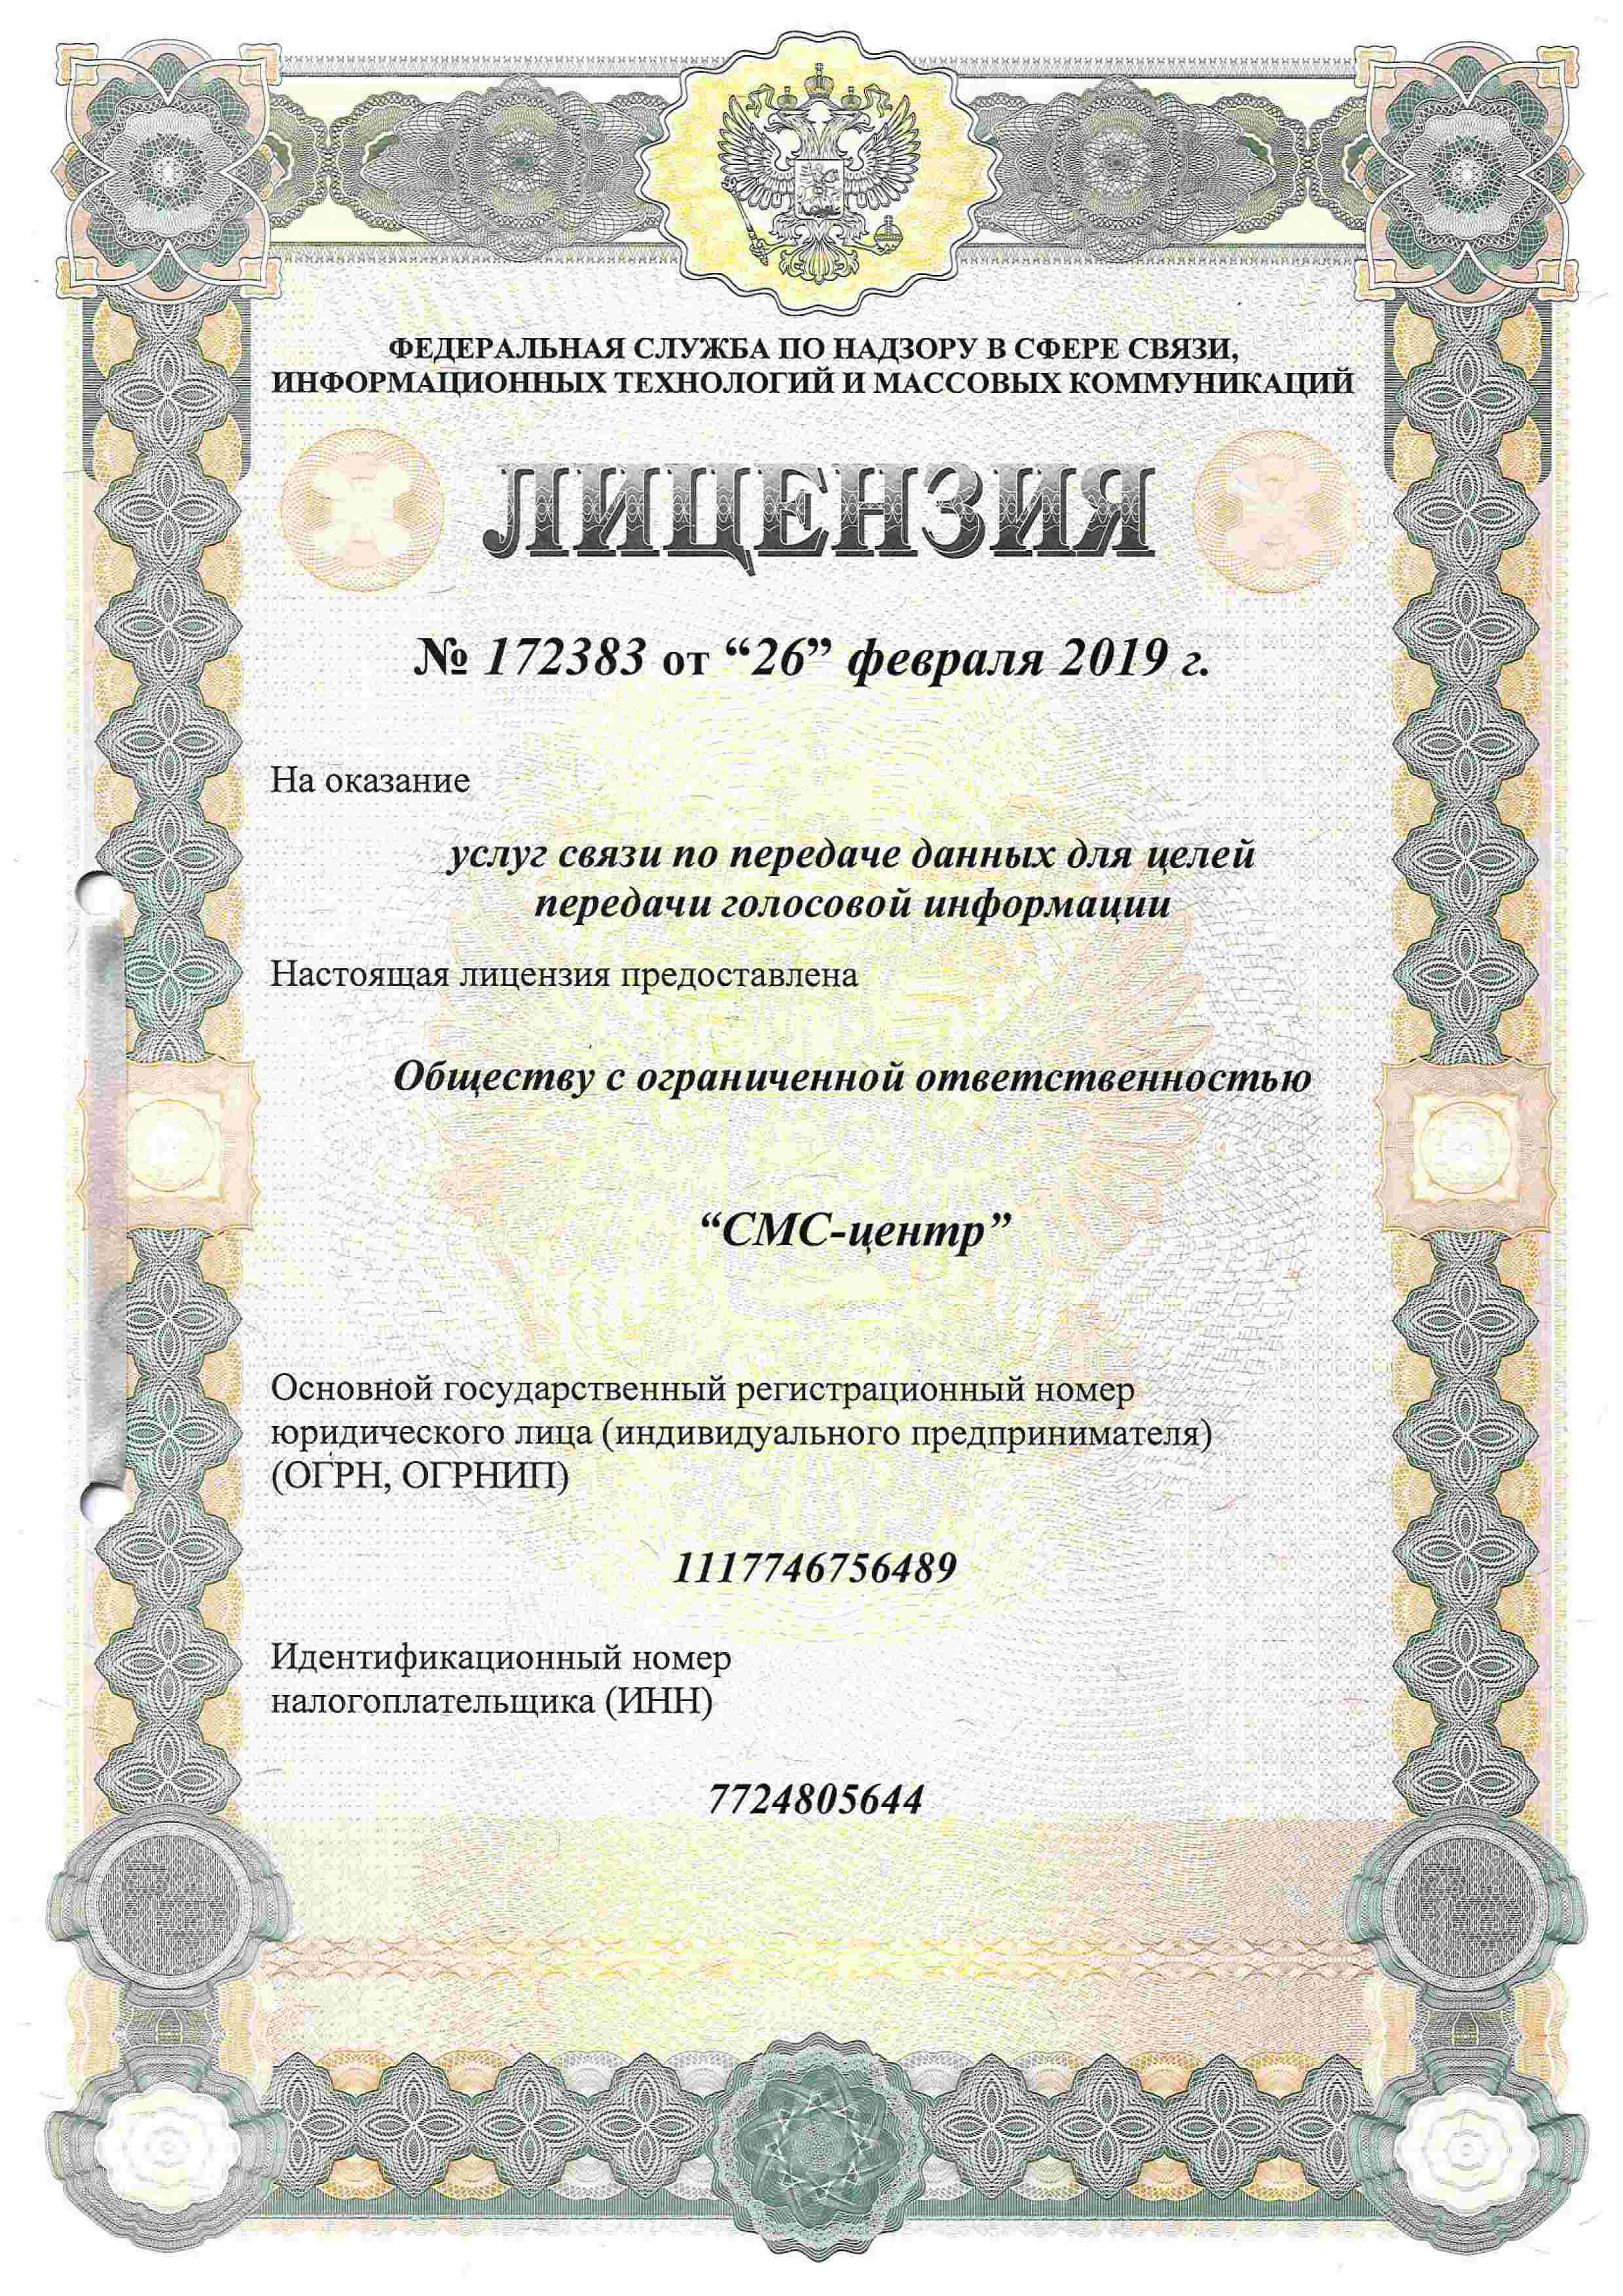 License for the provision of communication services for the transmission of voice information of SMS-center LLC (Moscow)